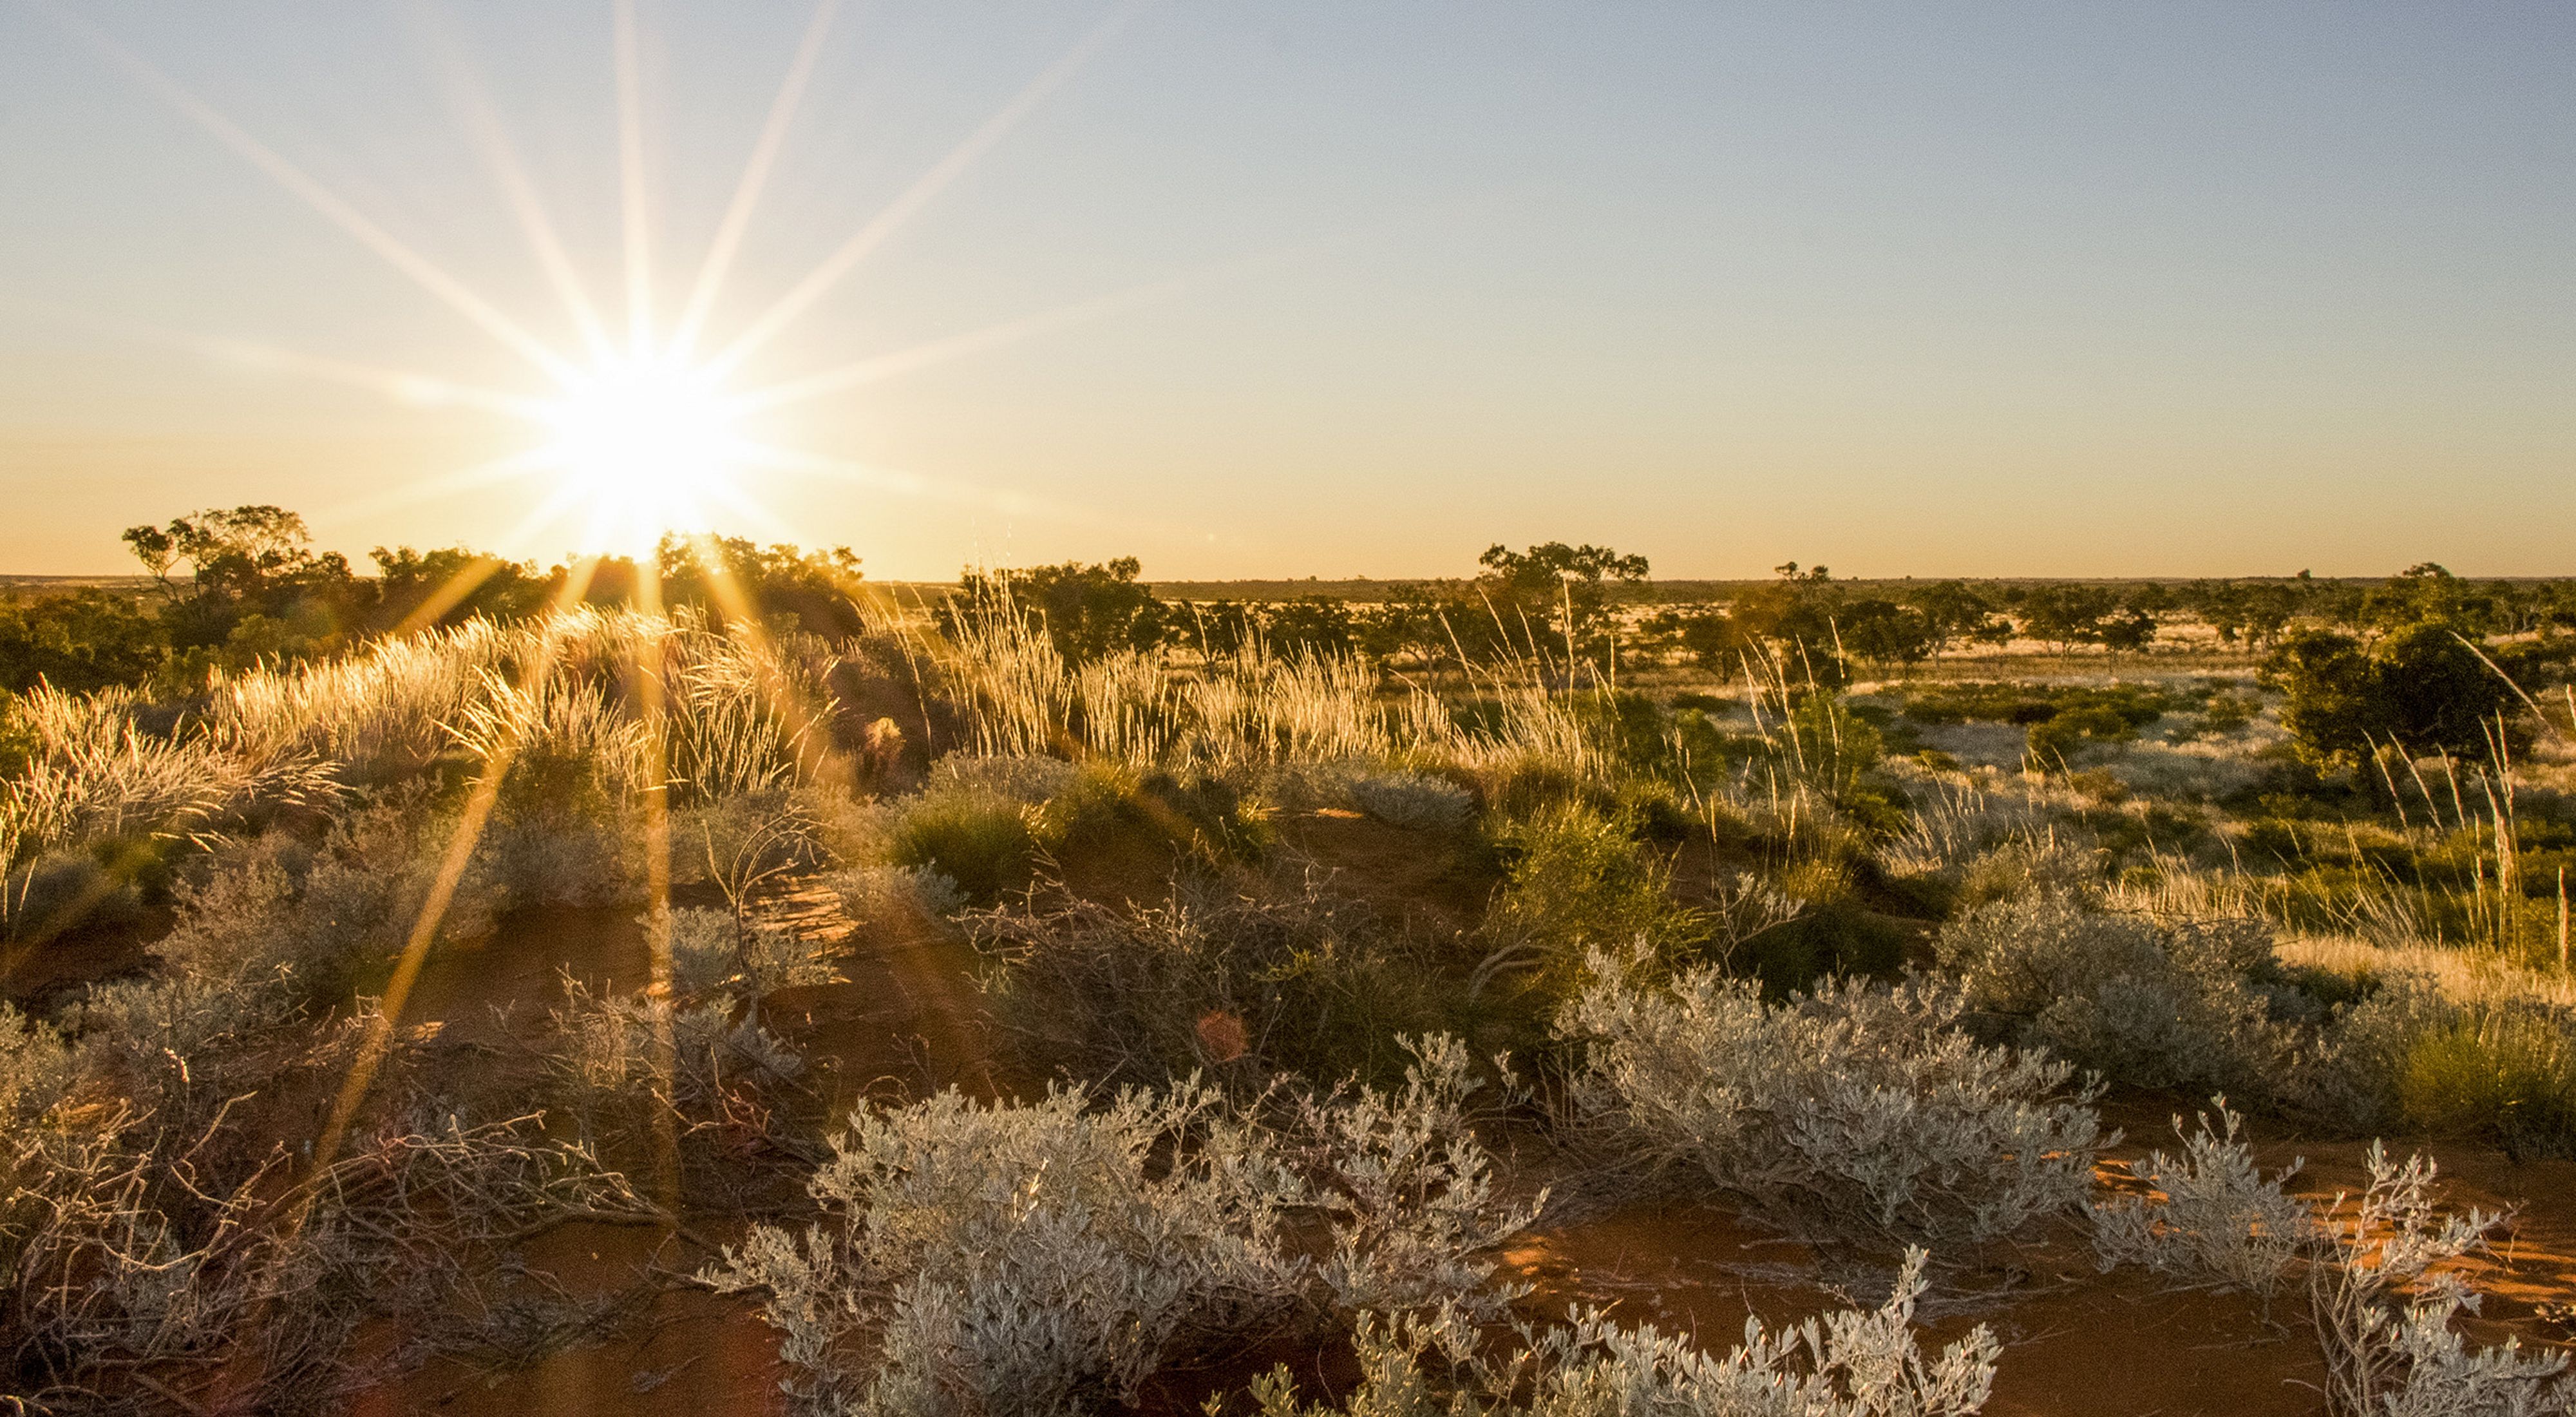 Sunset over the sand dunes on Martu country, Western Australia.